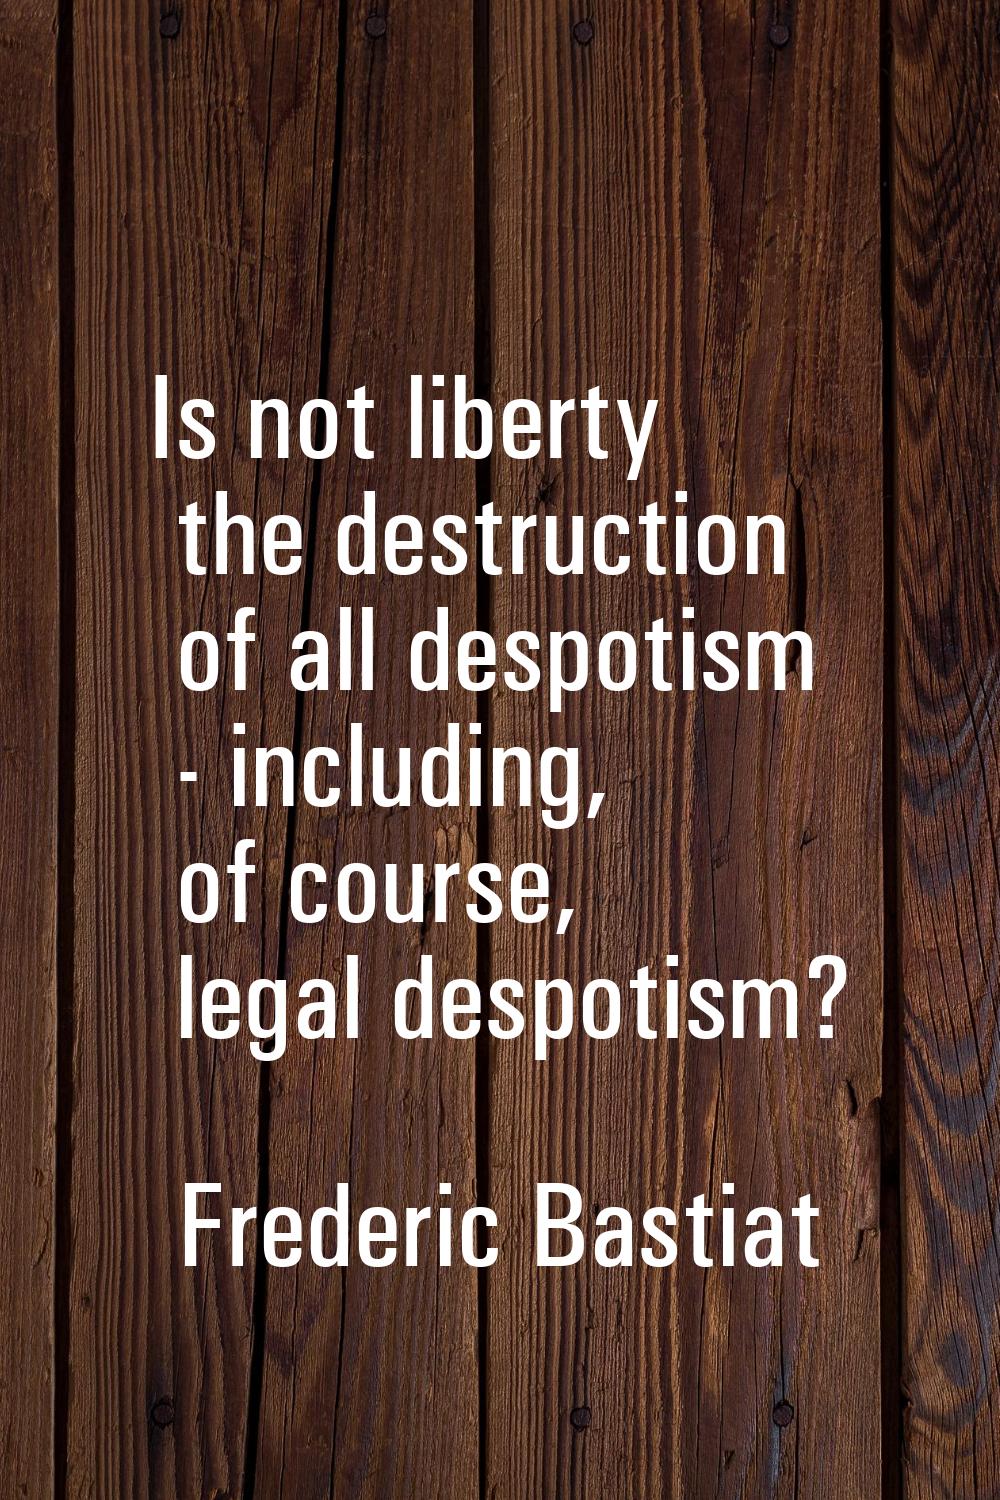 Is not liberty the destruction of all despotism - including, of course, legal despotism?